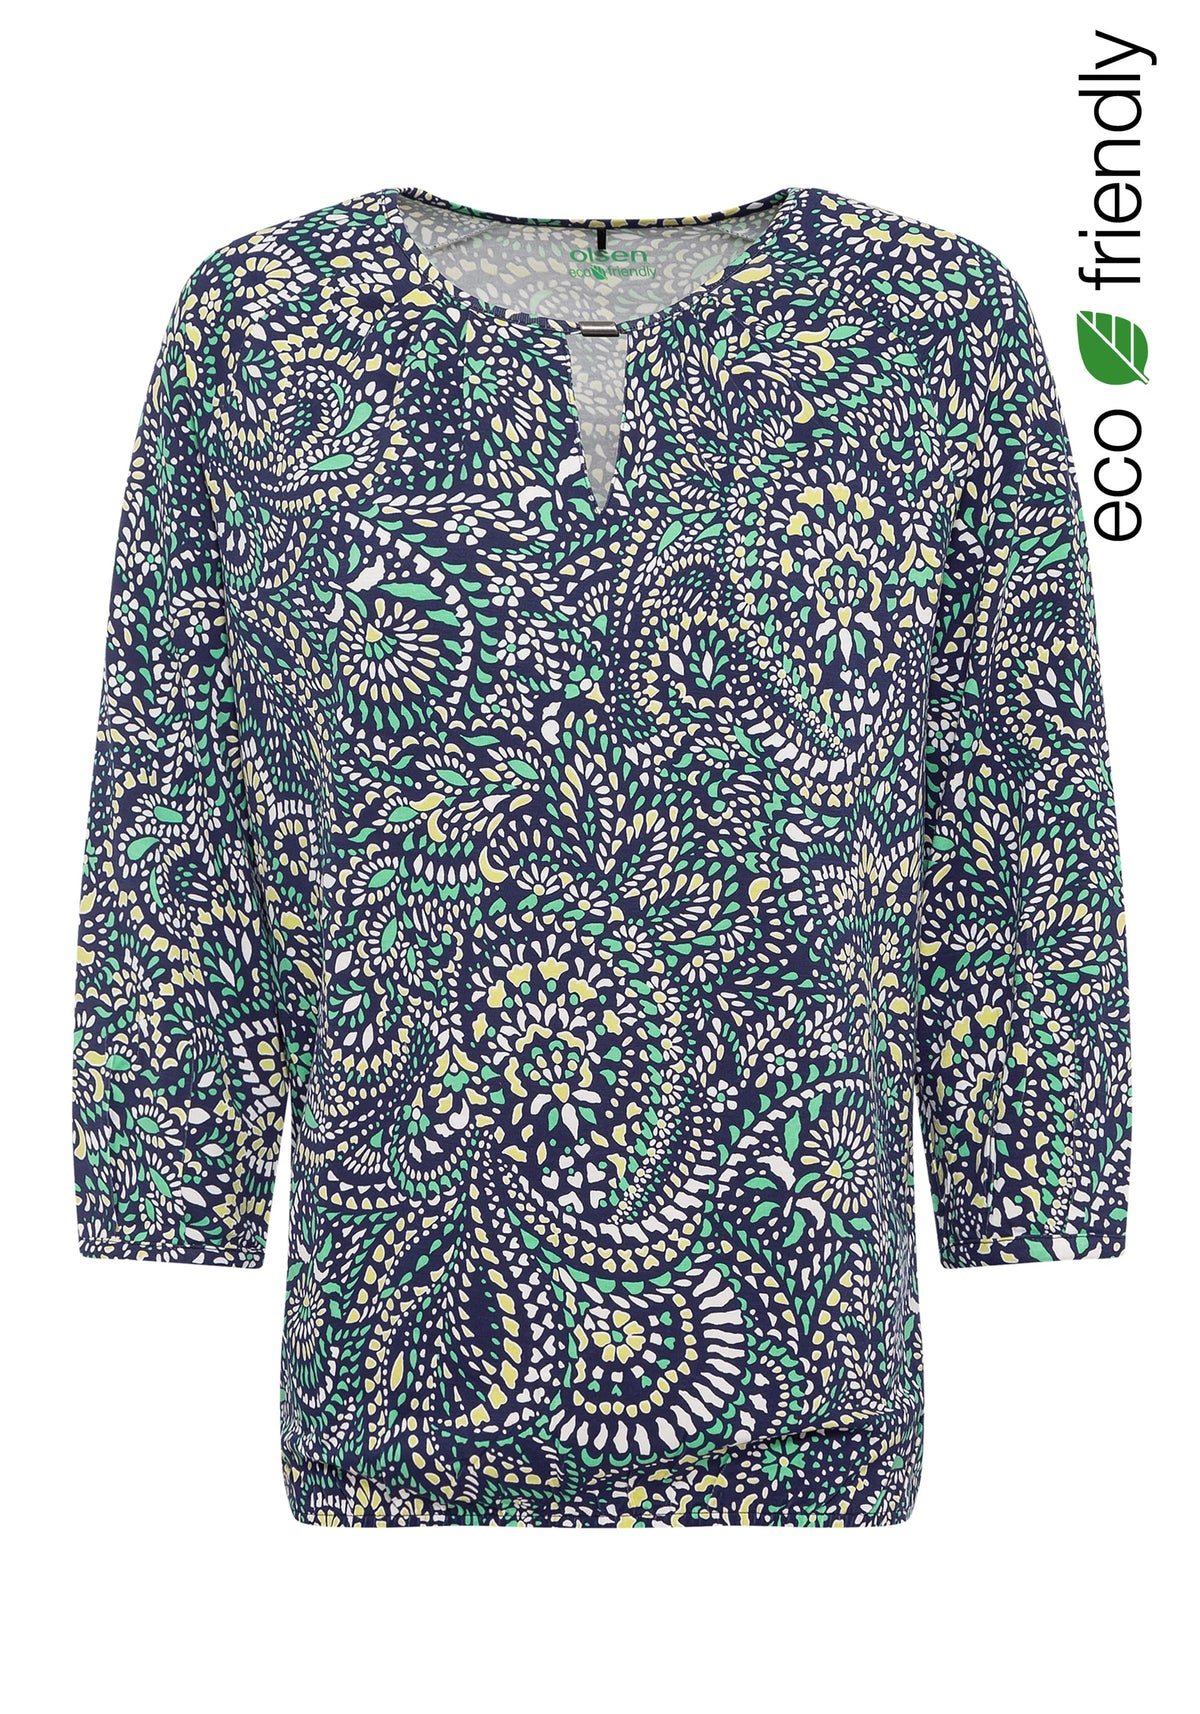 3/4 Sleeve Allover Print T-Shirt with Keyhole Neckline containing LENZING™ ECOVERO™ Viscose